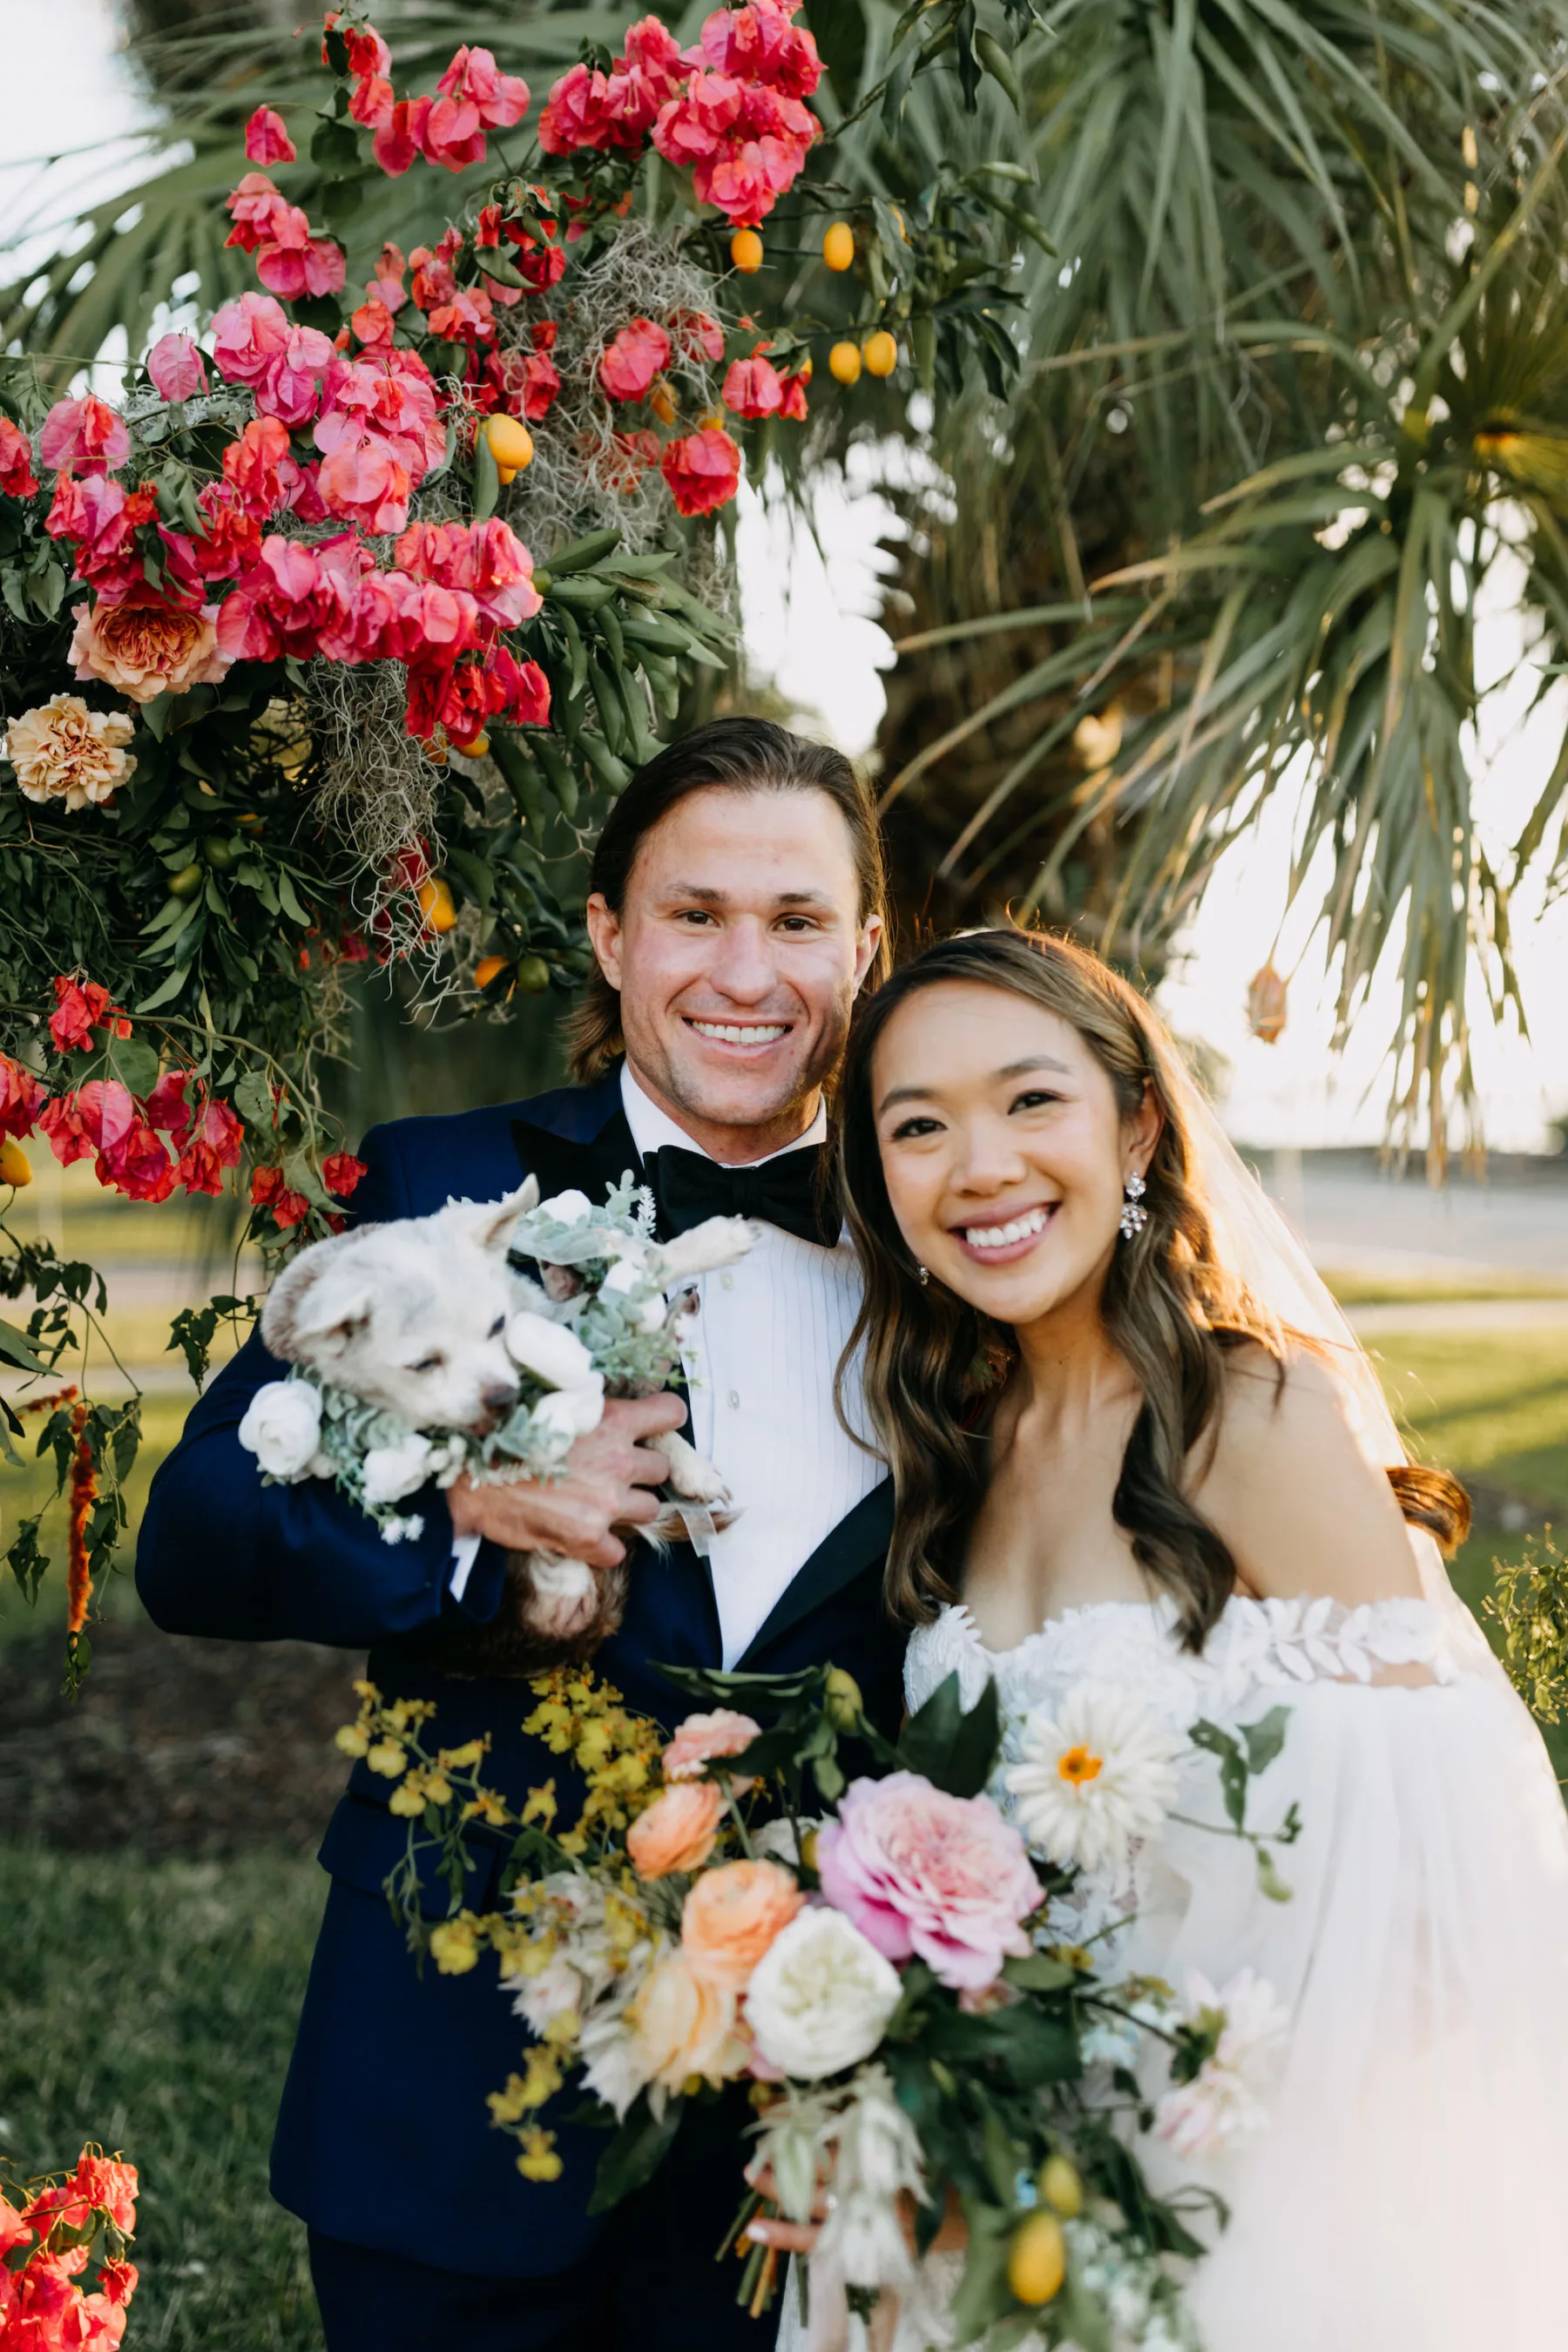 Bride and Groom with Dogs Wedding Portrait | Tampa Bay Photographer Amber McWhorter Photography